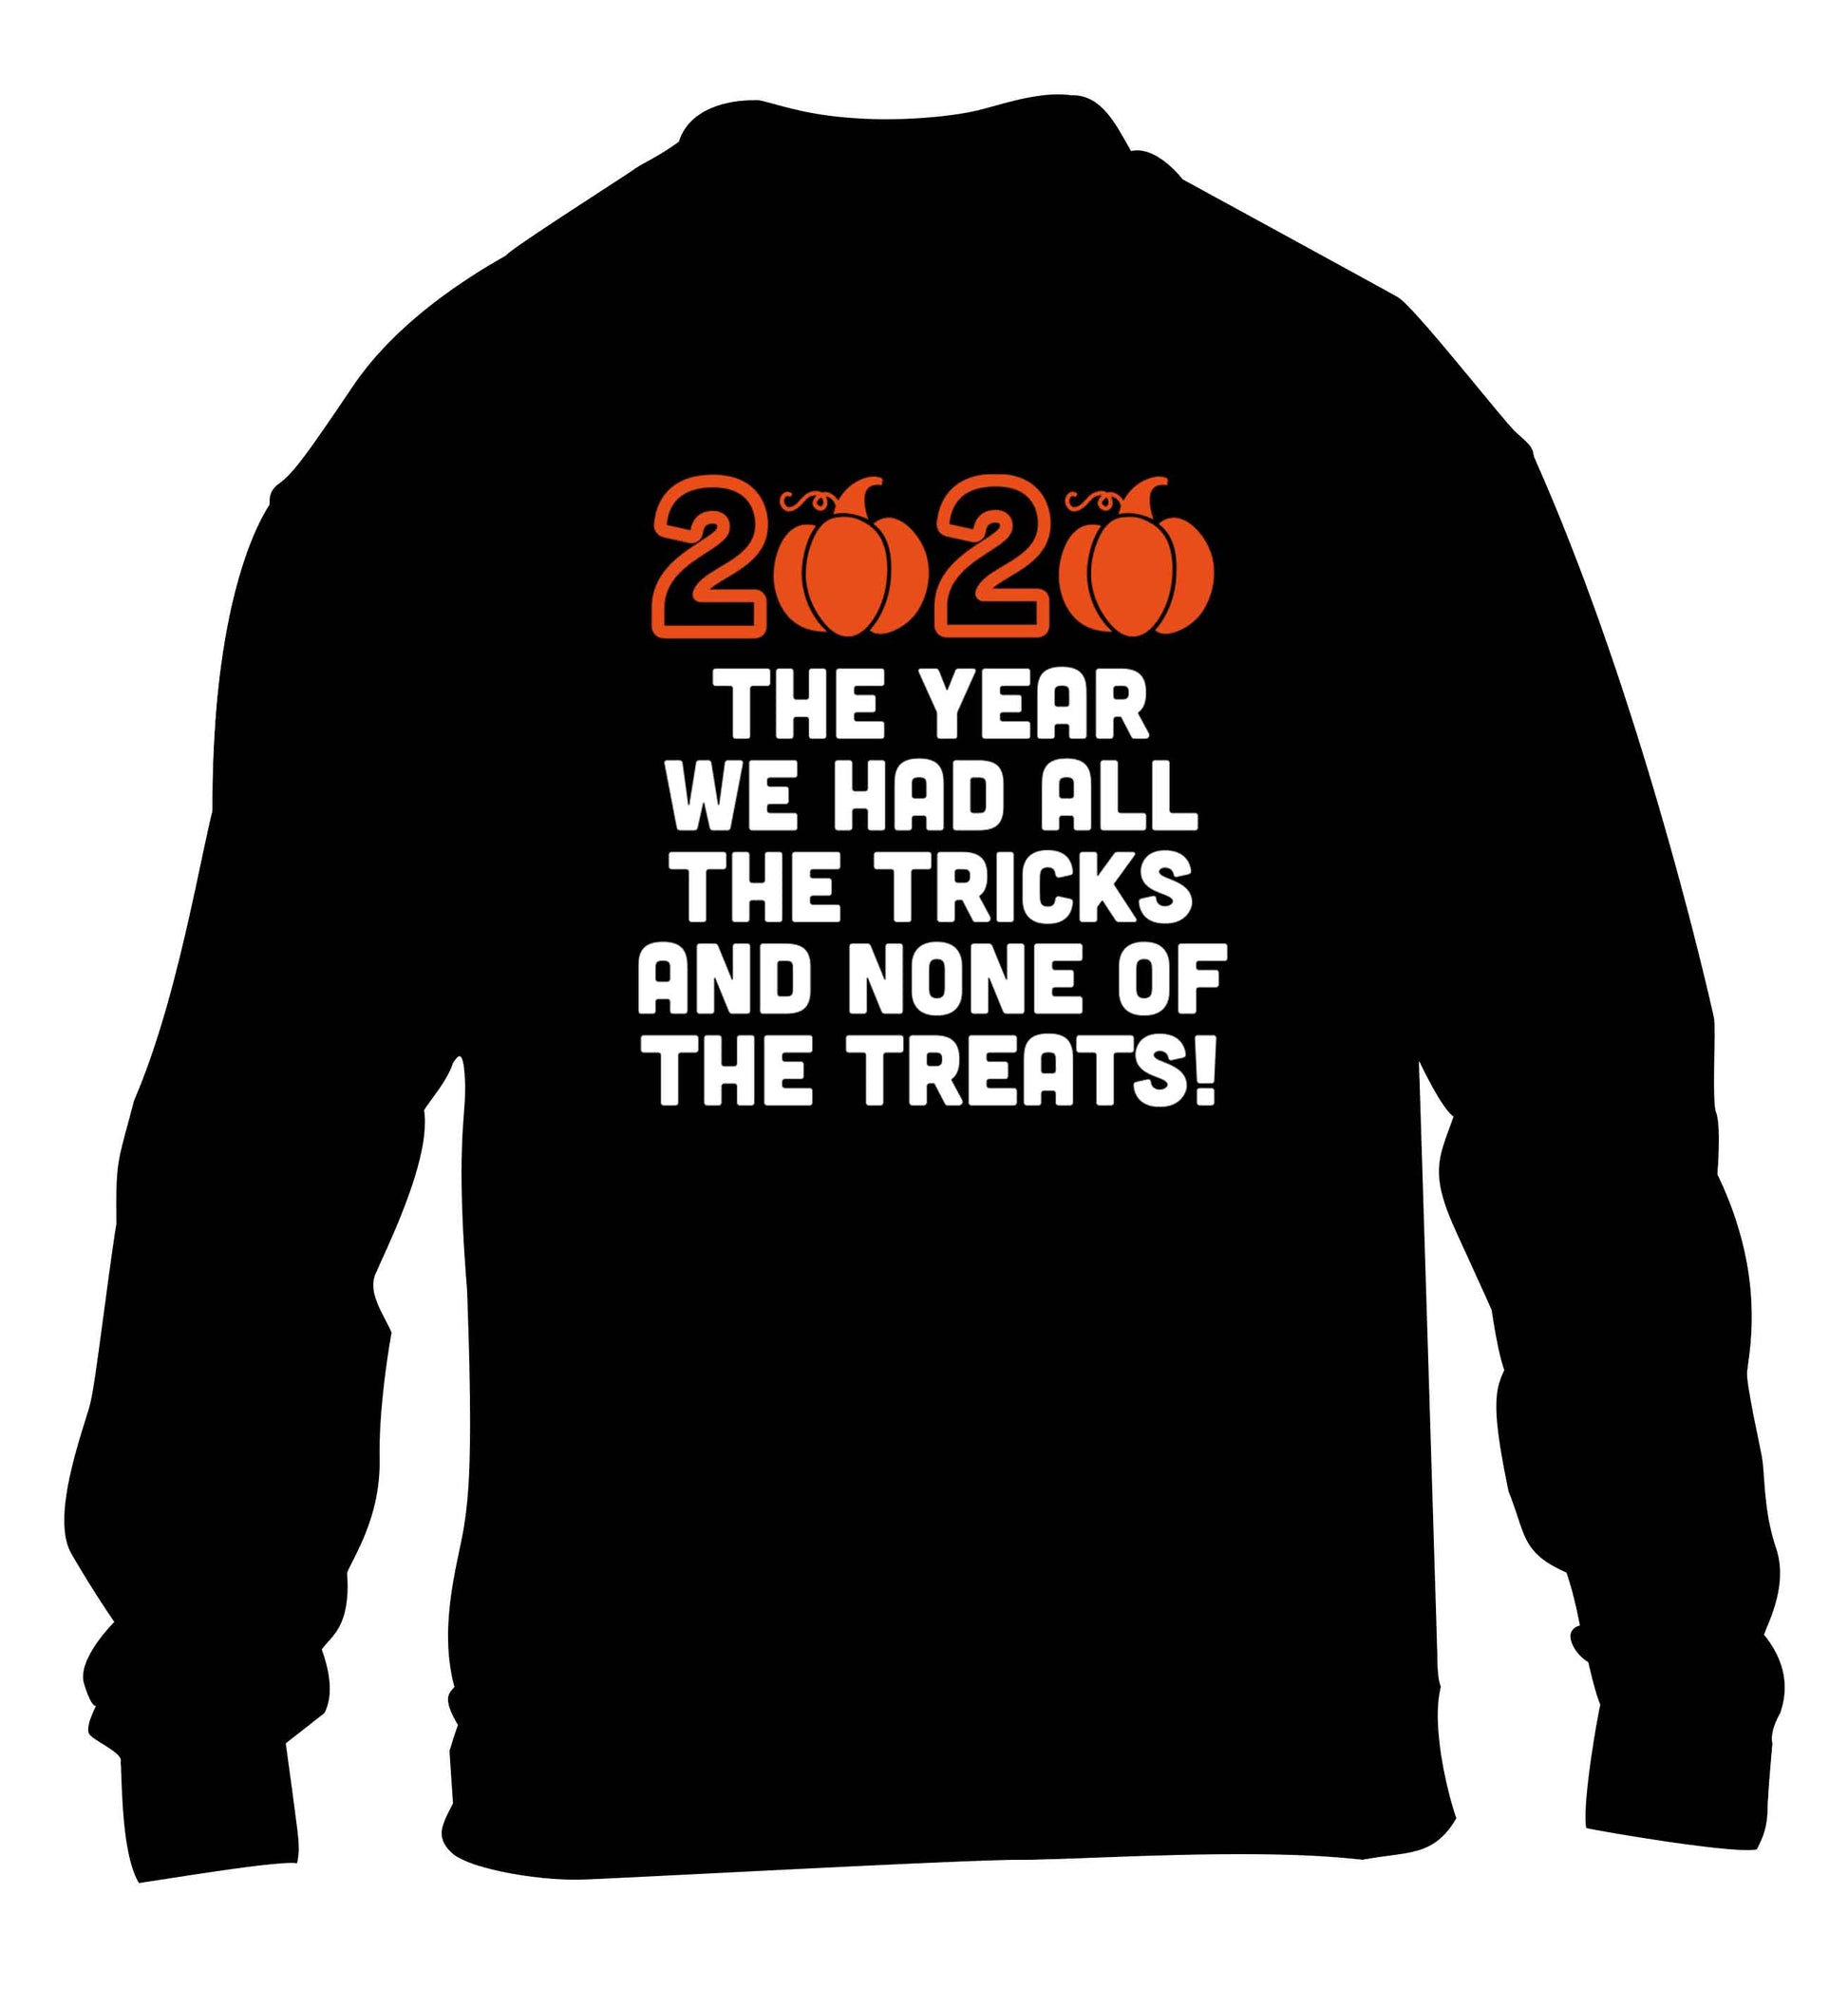 2020 The year we had all of the tricks and none of the treats children's black sweater 12-13 Years